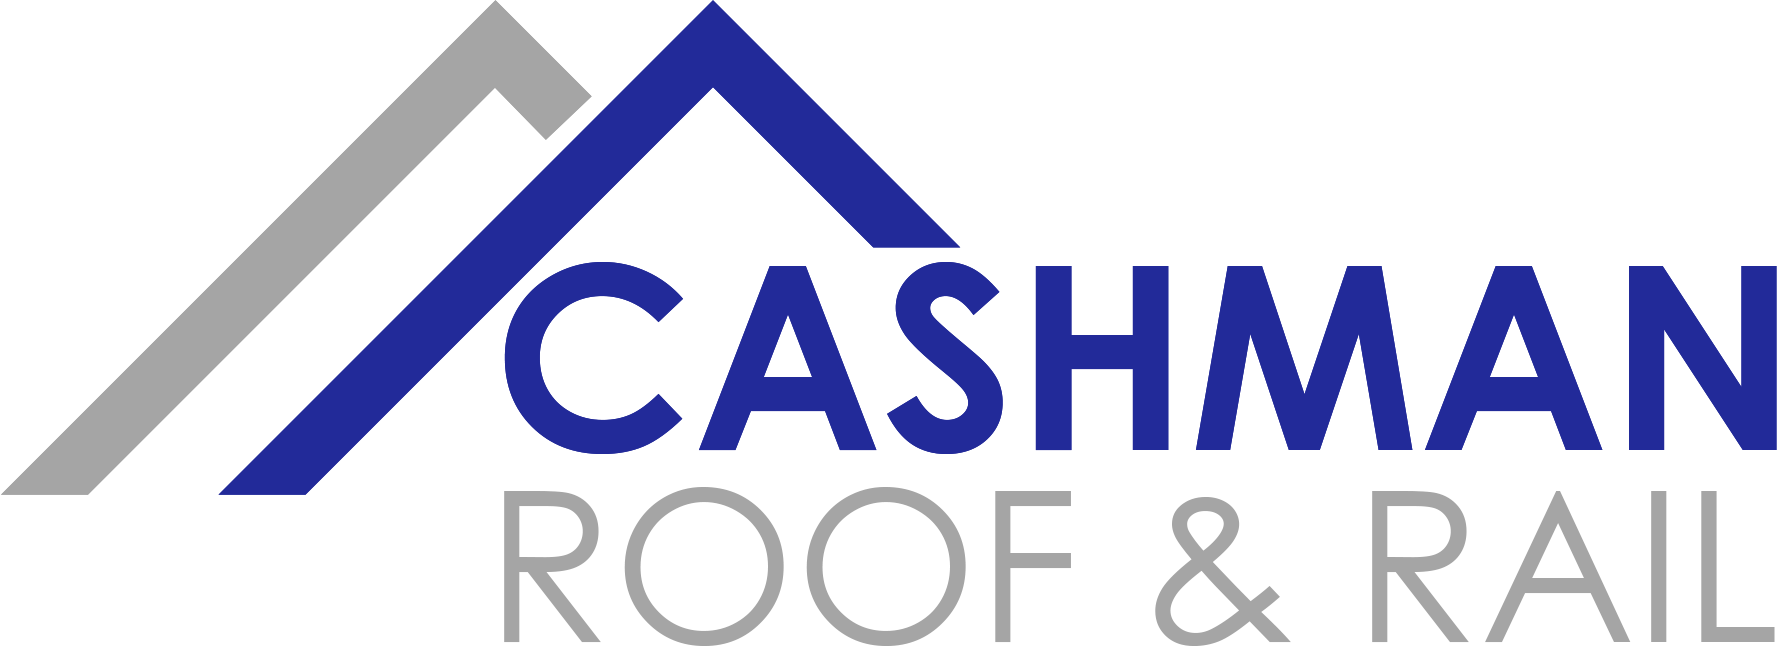 Cashman Roof and Rail